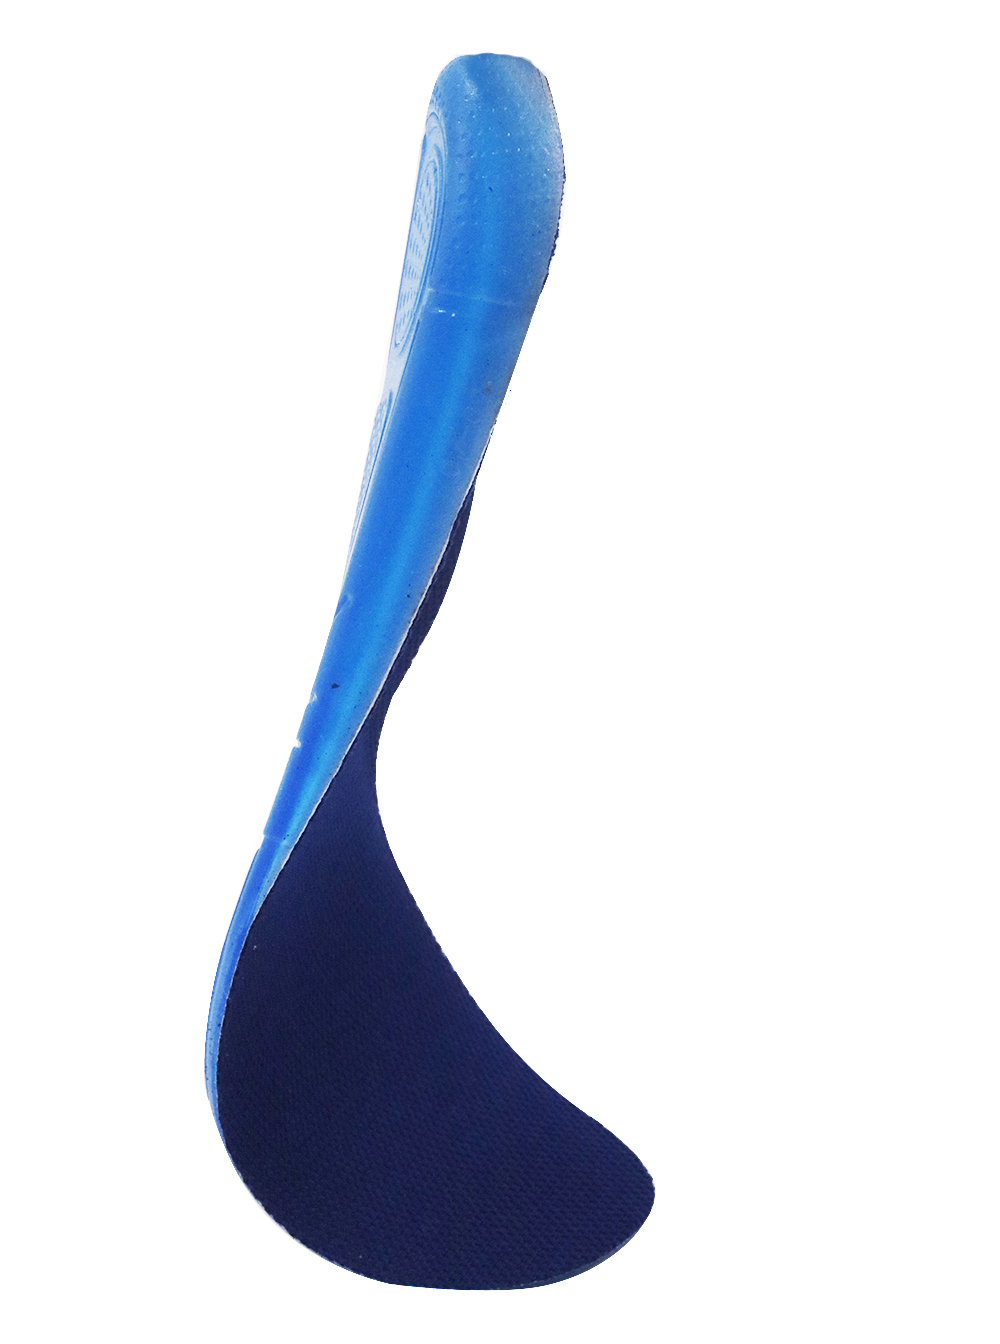 S-King best gel insoles for high heels for fetatarsal pad-4